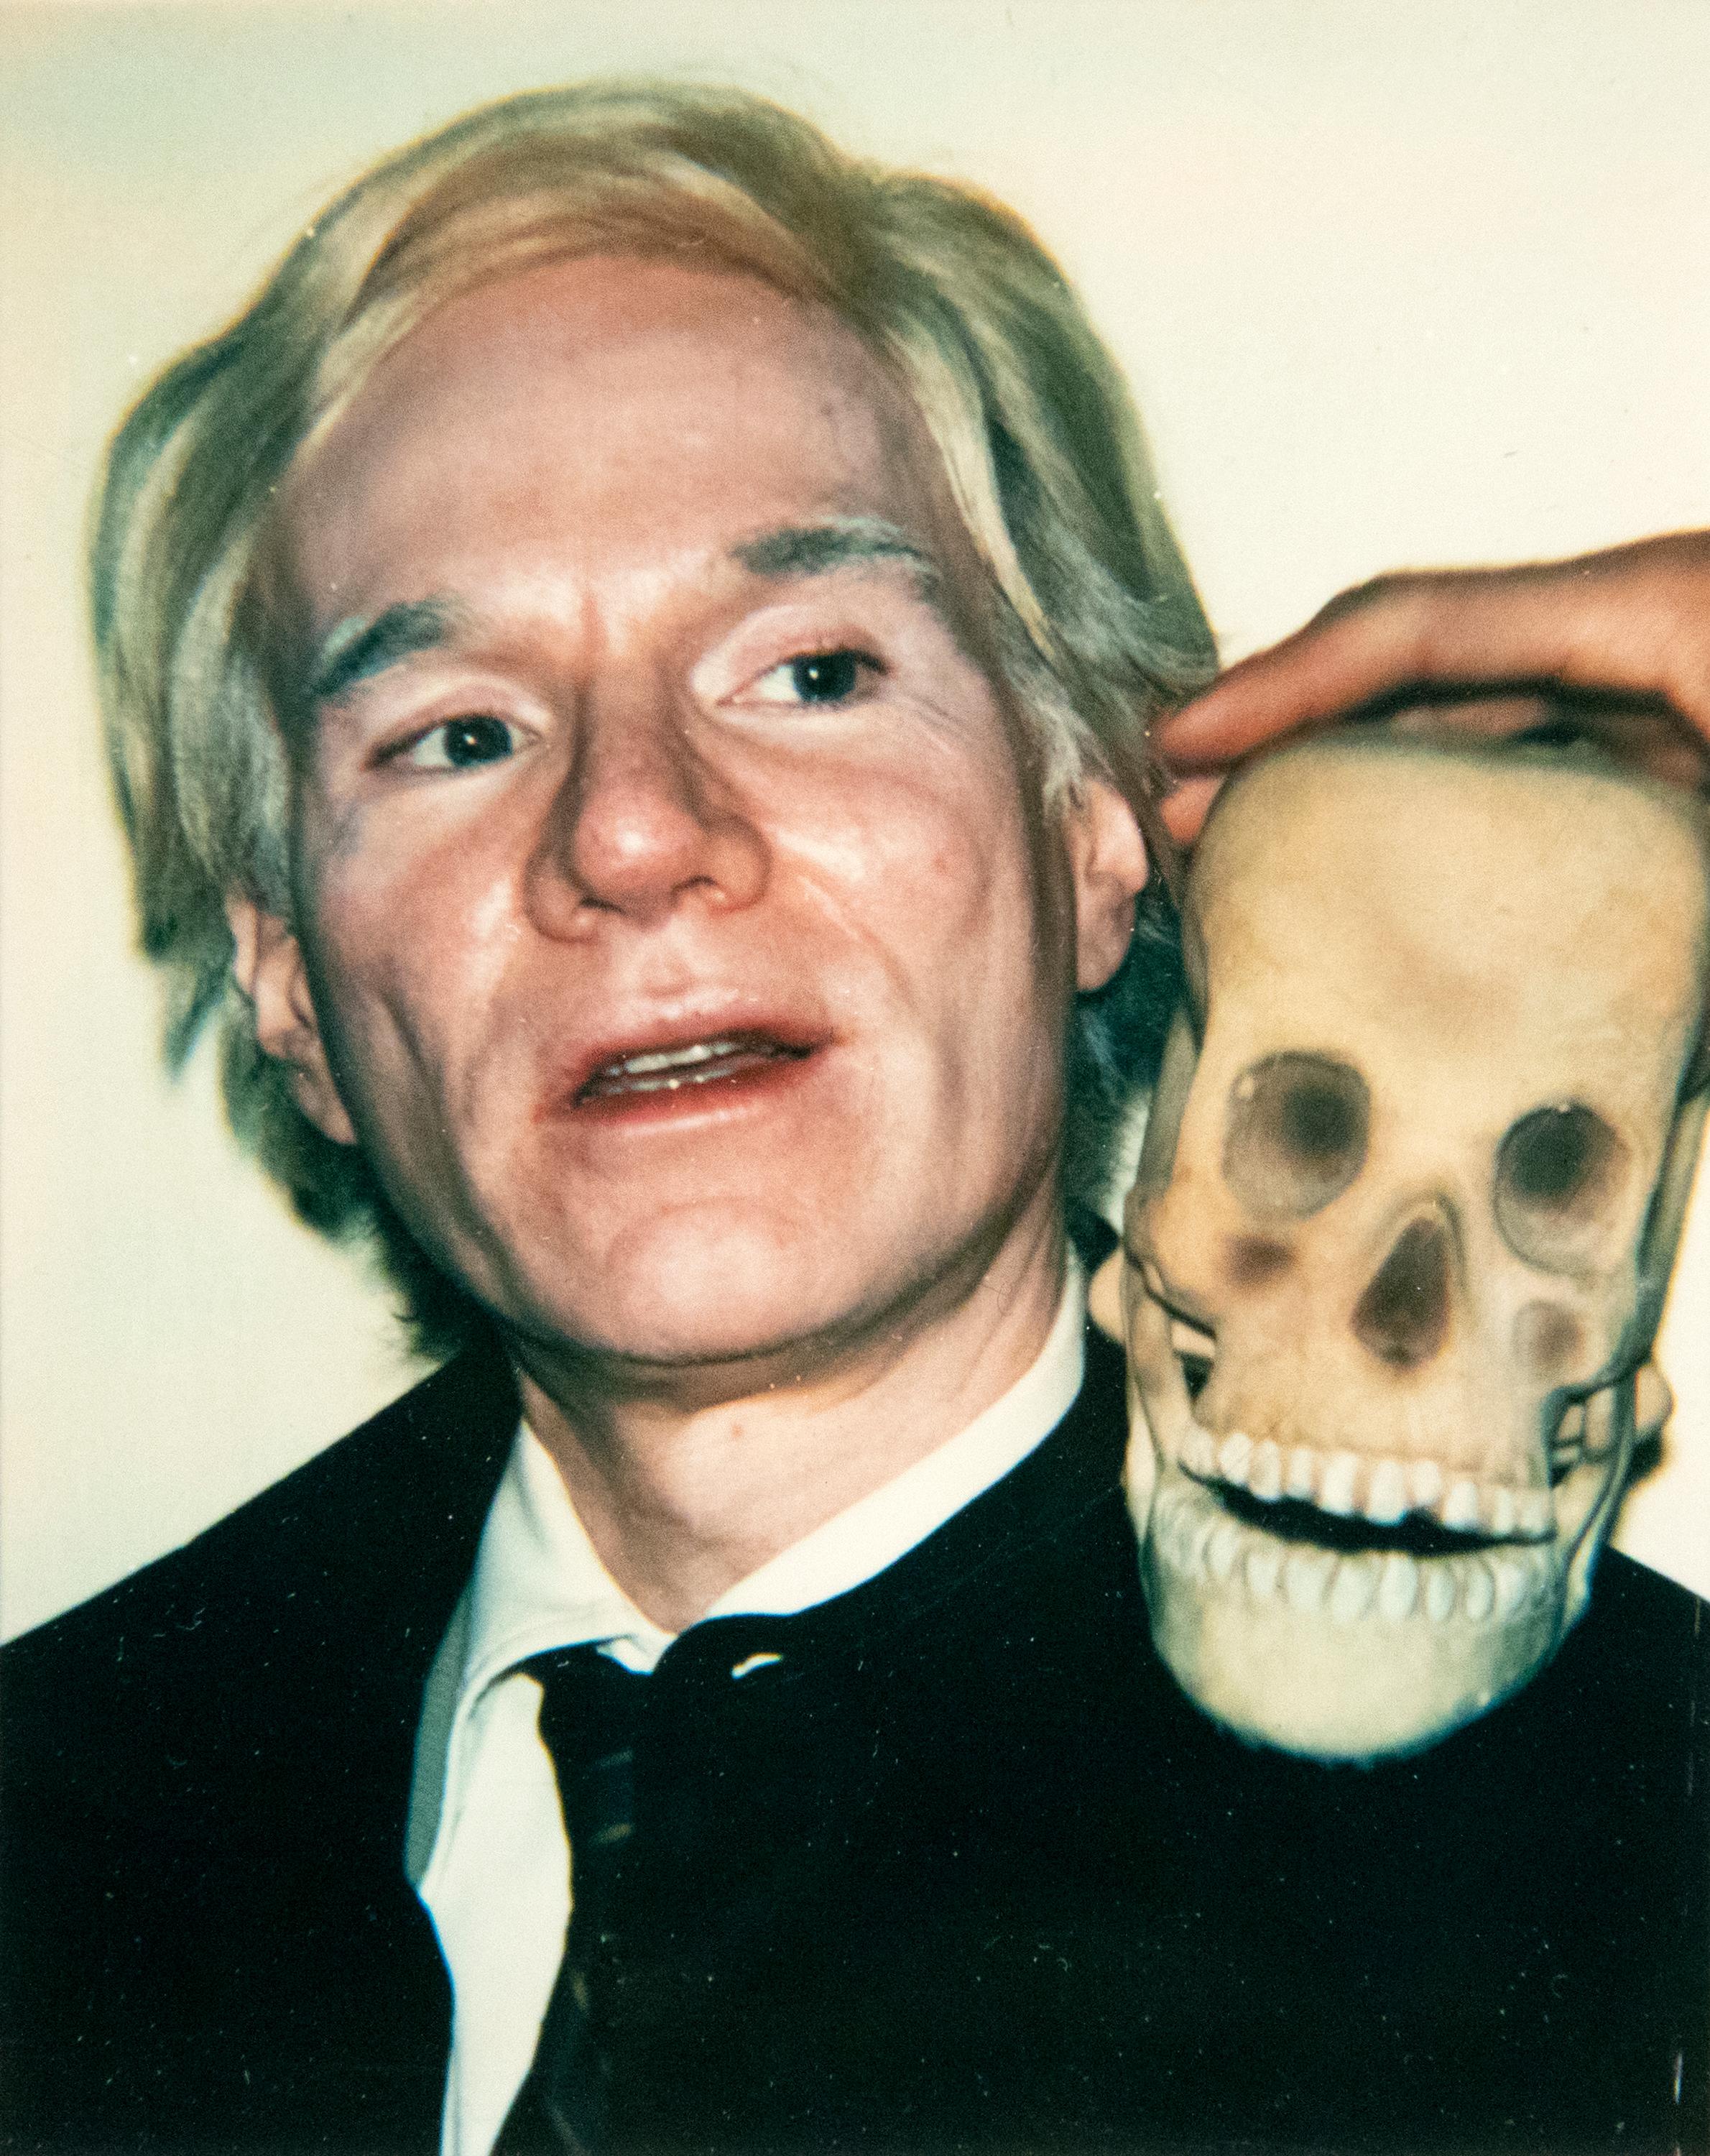 Andy Warhol Portrait Photograph - Self-Portrait with Skull